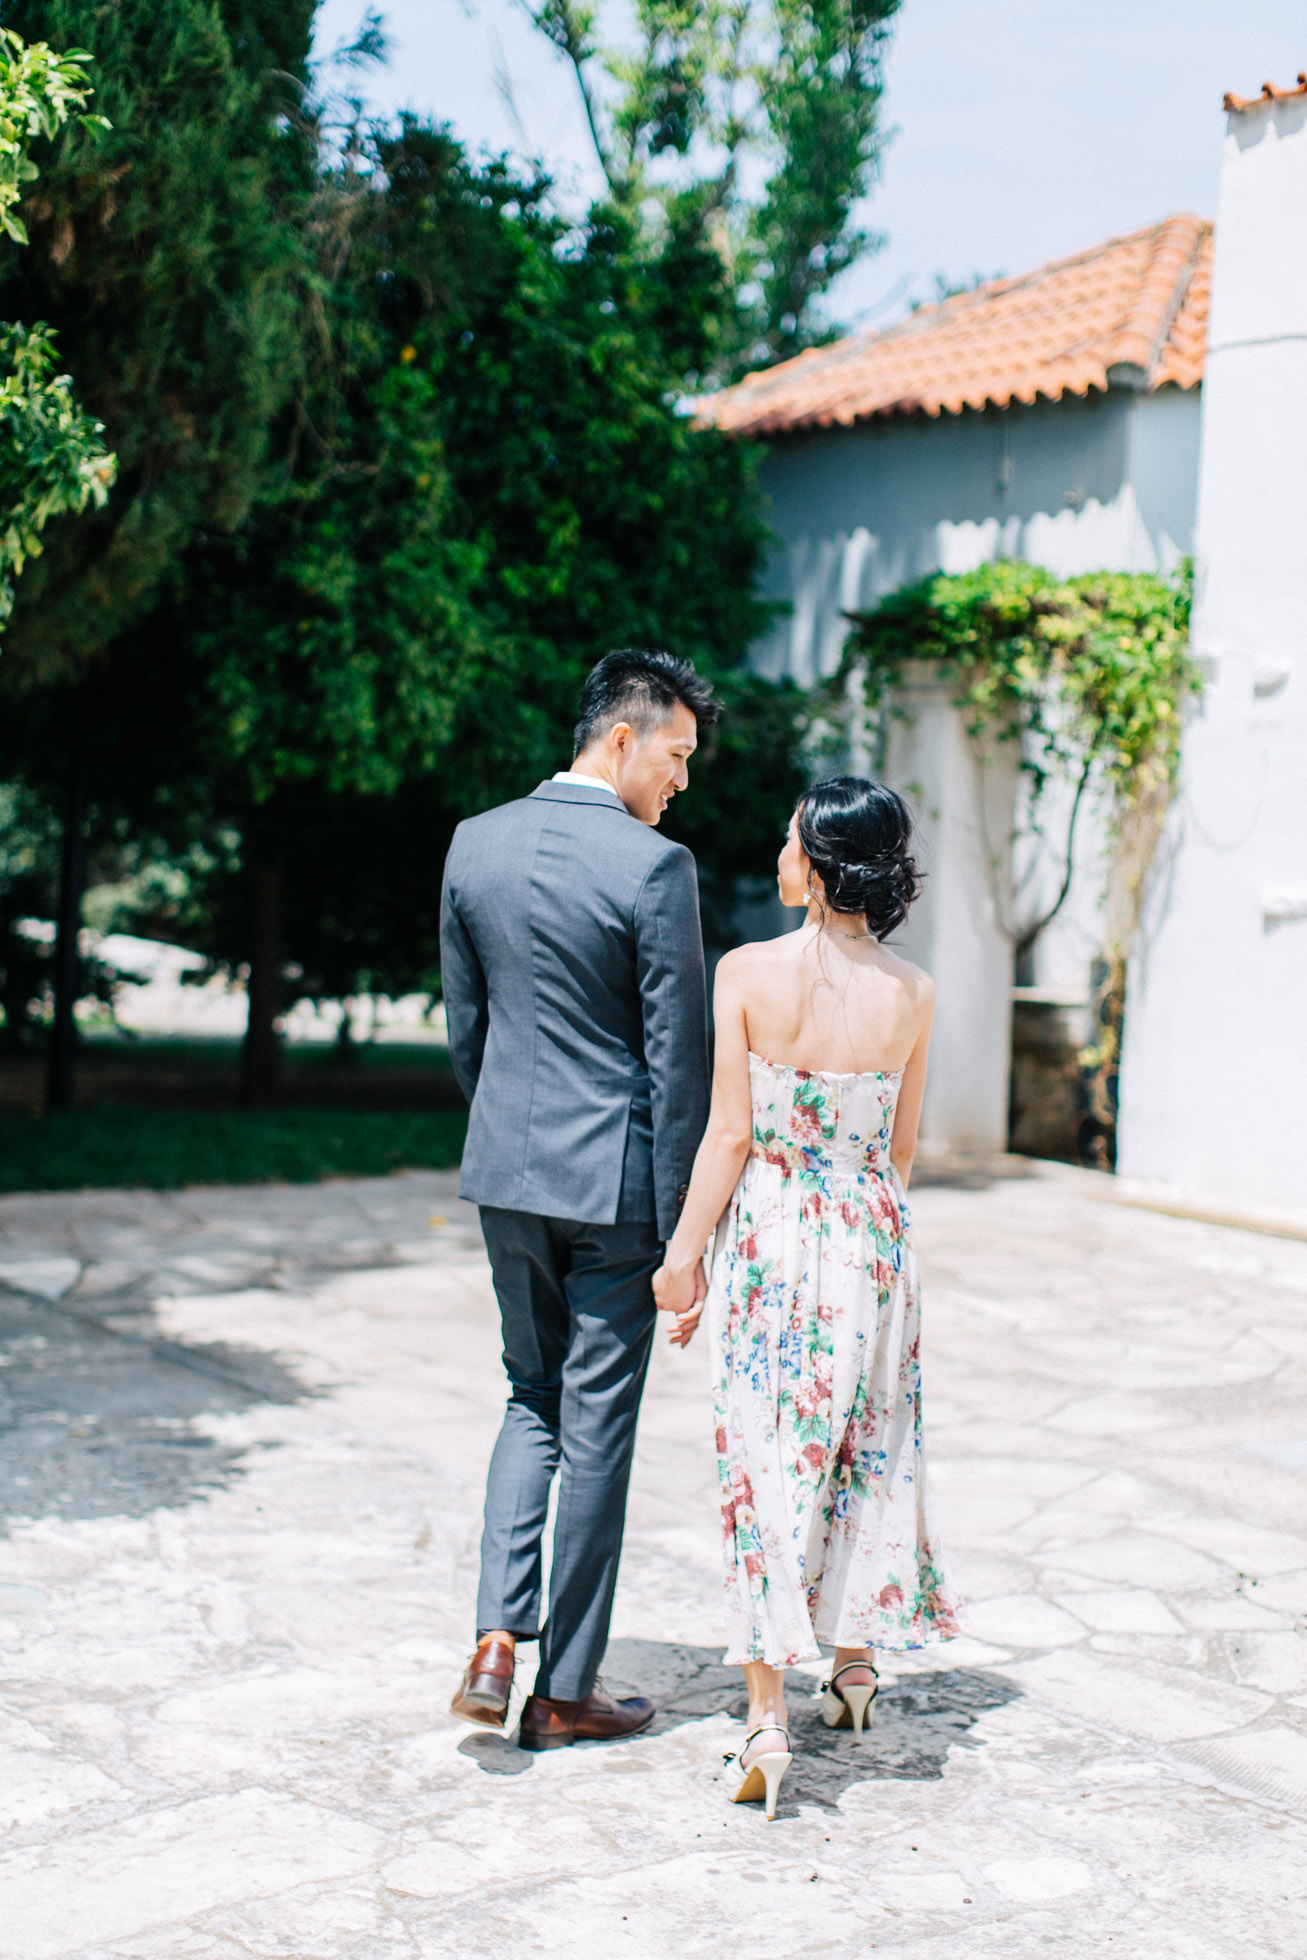 Young elegant couple wearing summer outfits is posing for their elopemement portraits for professional photographer team in Crete island, Greece. Colorful garden and park backdrop adds to the happy and vibrant feel of this session.